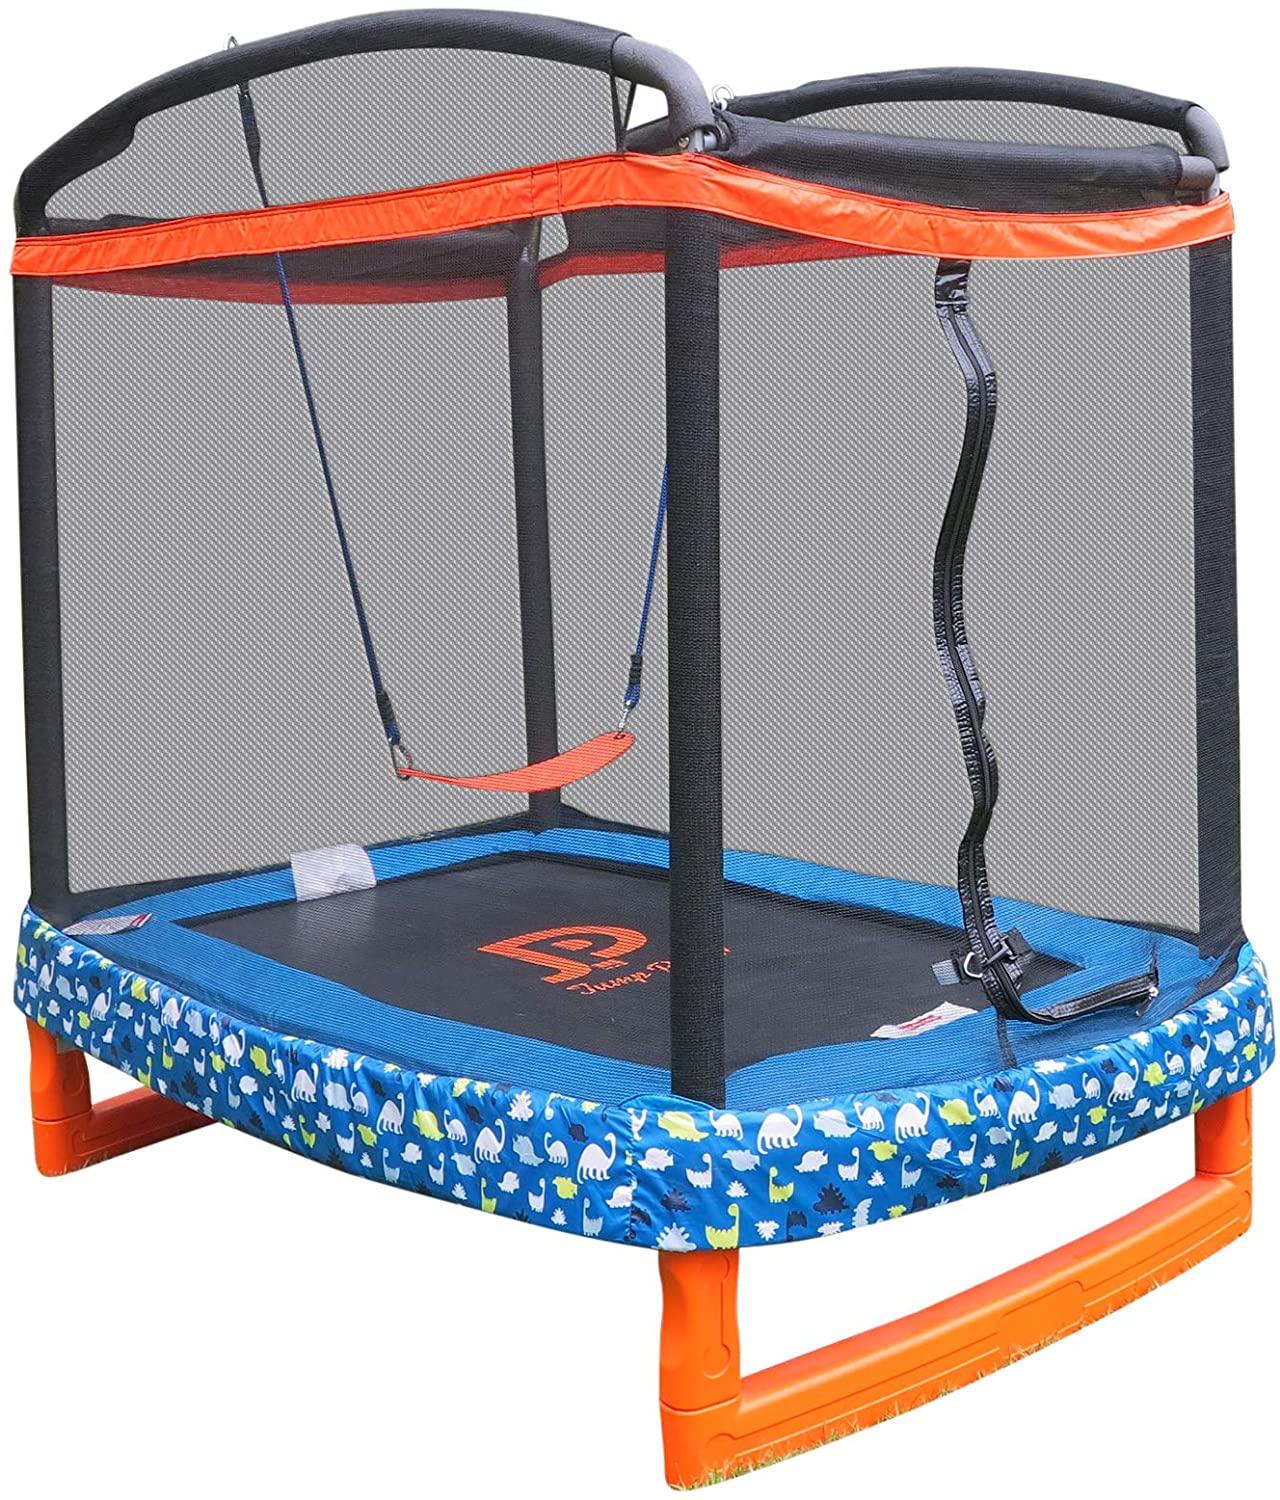 JUMP POWER 72” x 50” Rectangle Indoor and Outdoor Trampoline & Safety Net with Swing Combo for Toddlers & Kids